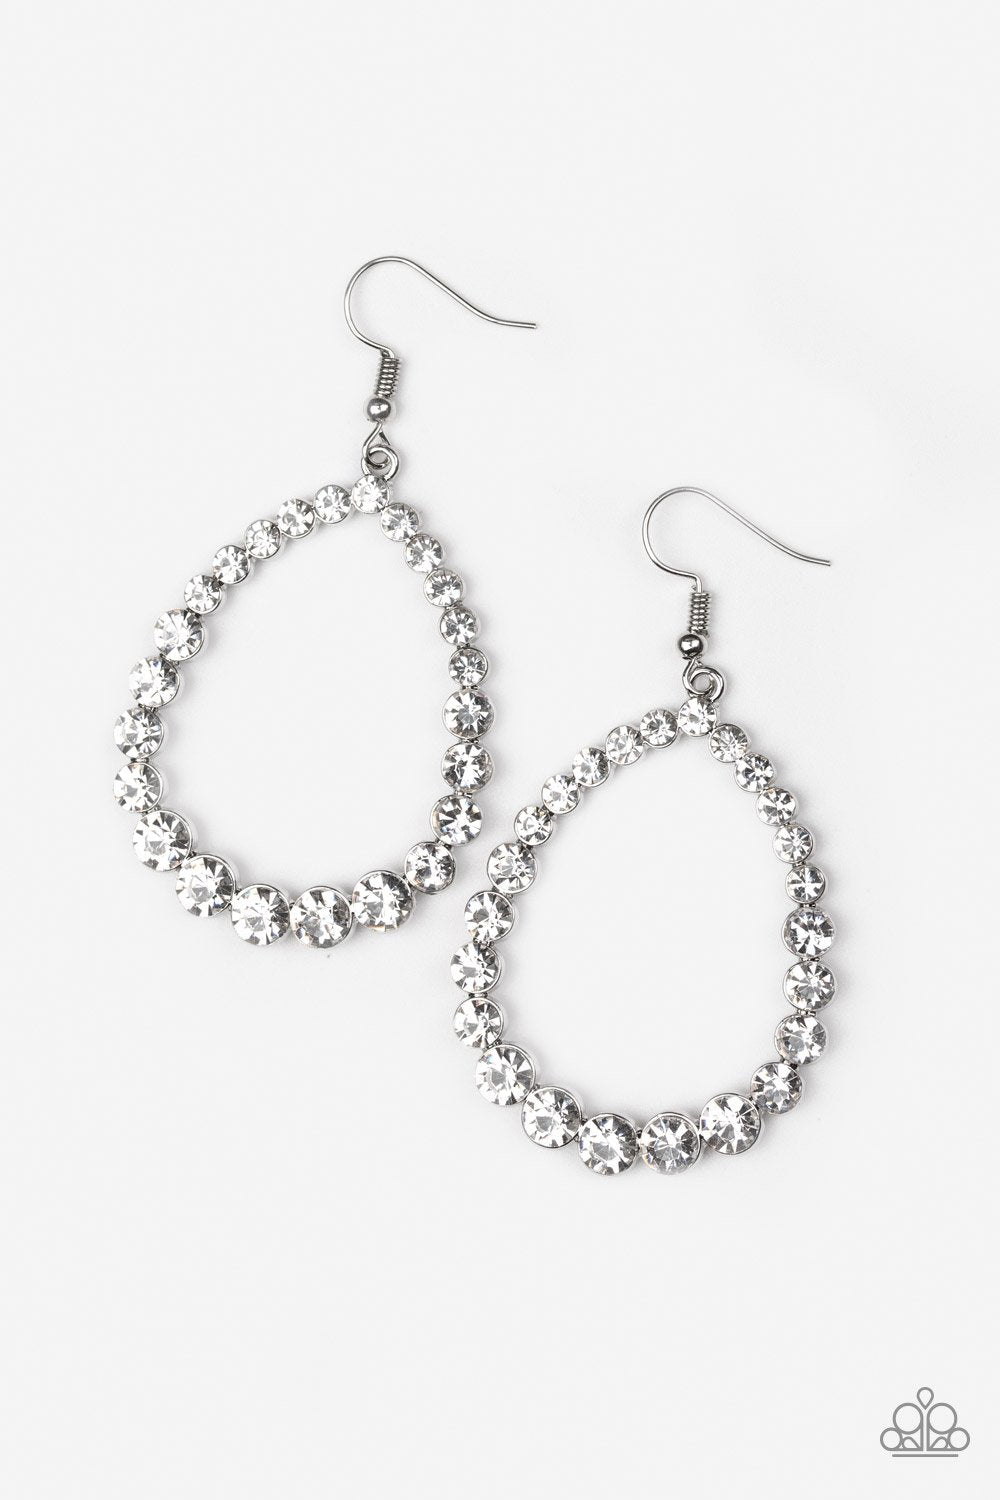 Rise and Sparkle White Rhinestone Teardrop Earrings - Paparazzi Accessories-CarasShop.com - $5 Jewelry by Cara Jewels